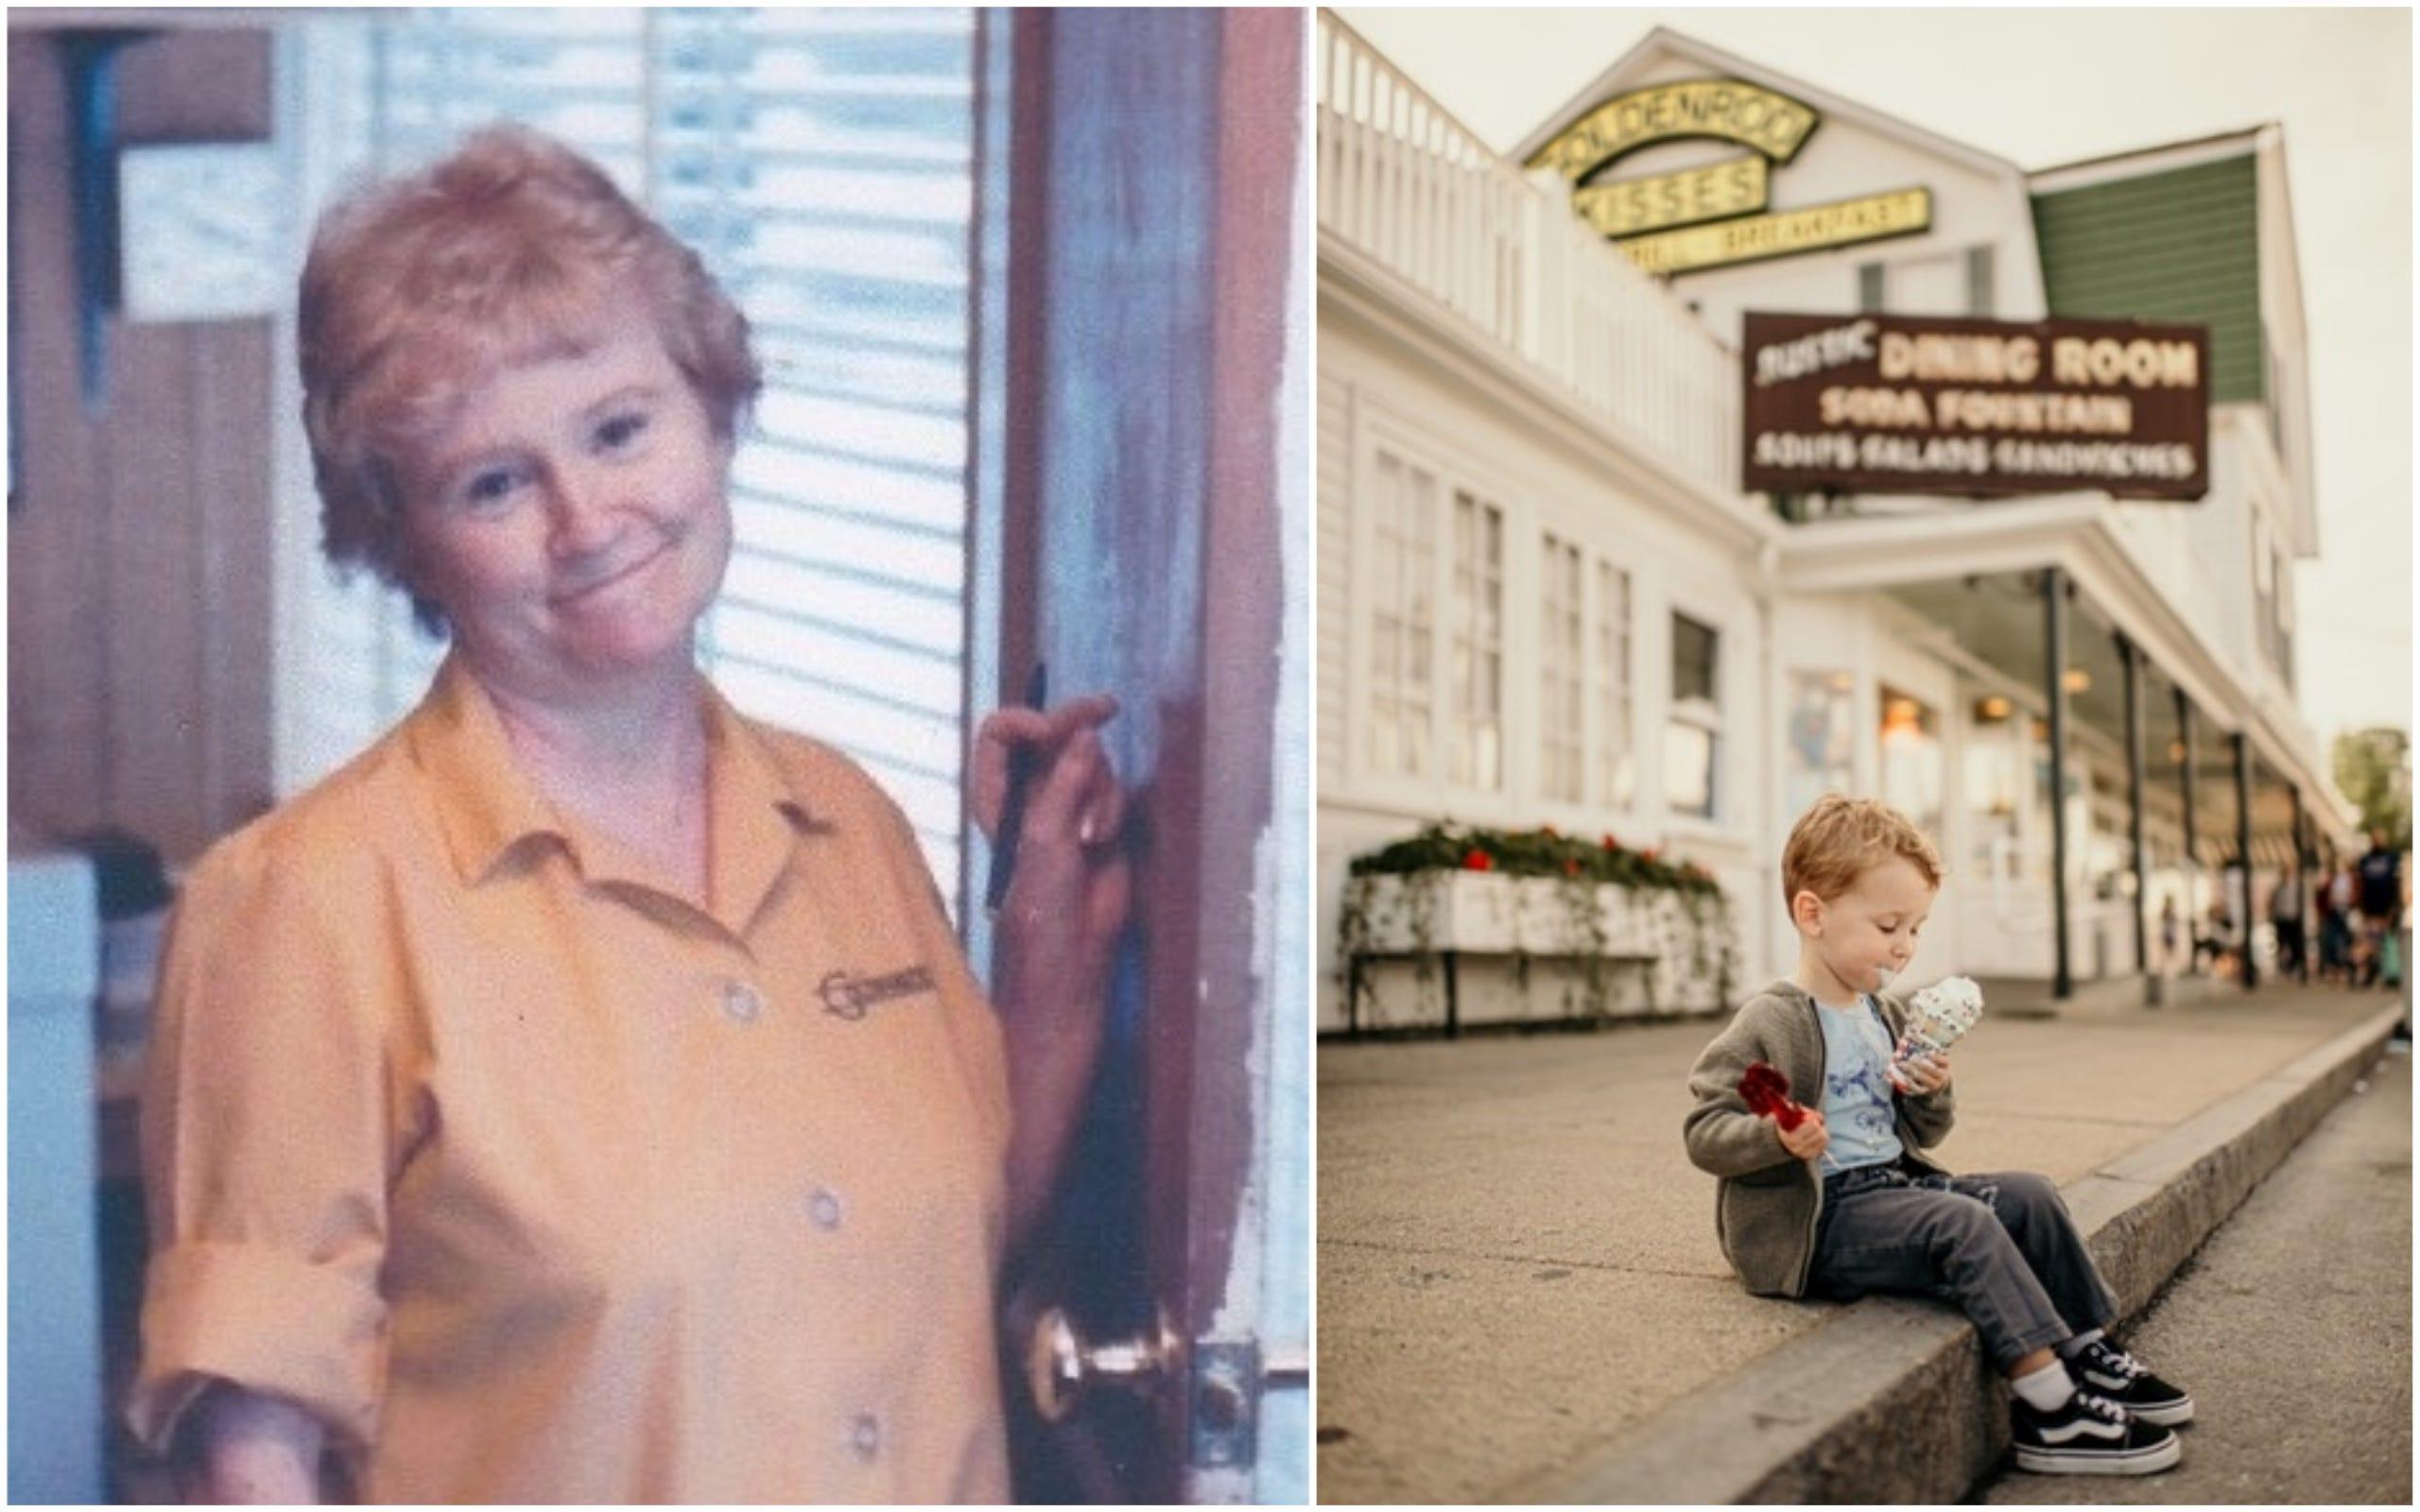 Pat Peck, a long-time co-owner of The Goldenrod in York Beach, Maine, passed away in November 2020, leaving a legacy that lives on as her son steers the business through the pandemic. Pat